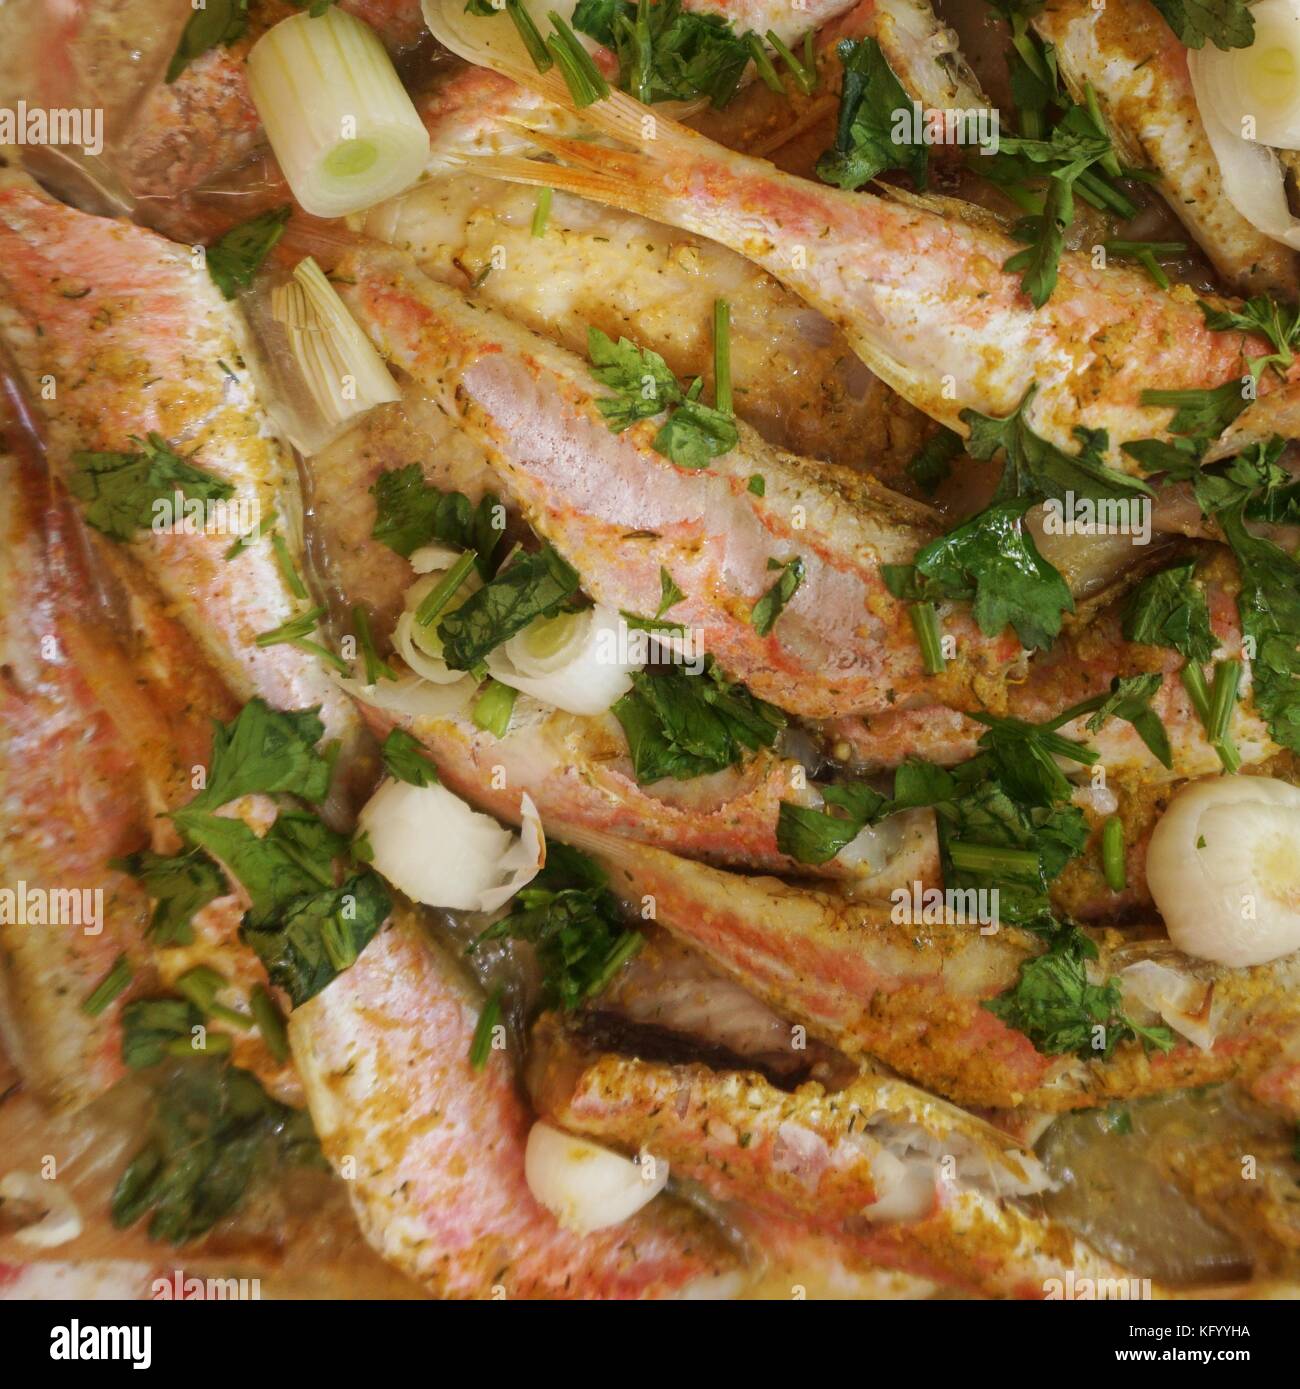 Small sea fish baked on a baking try, top view. Stock Photo